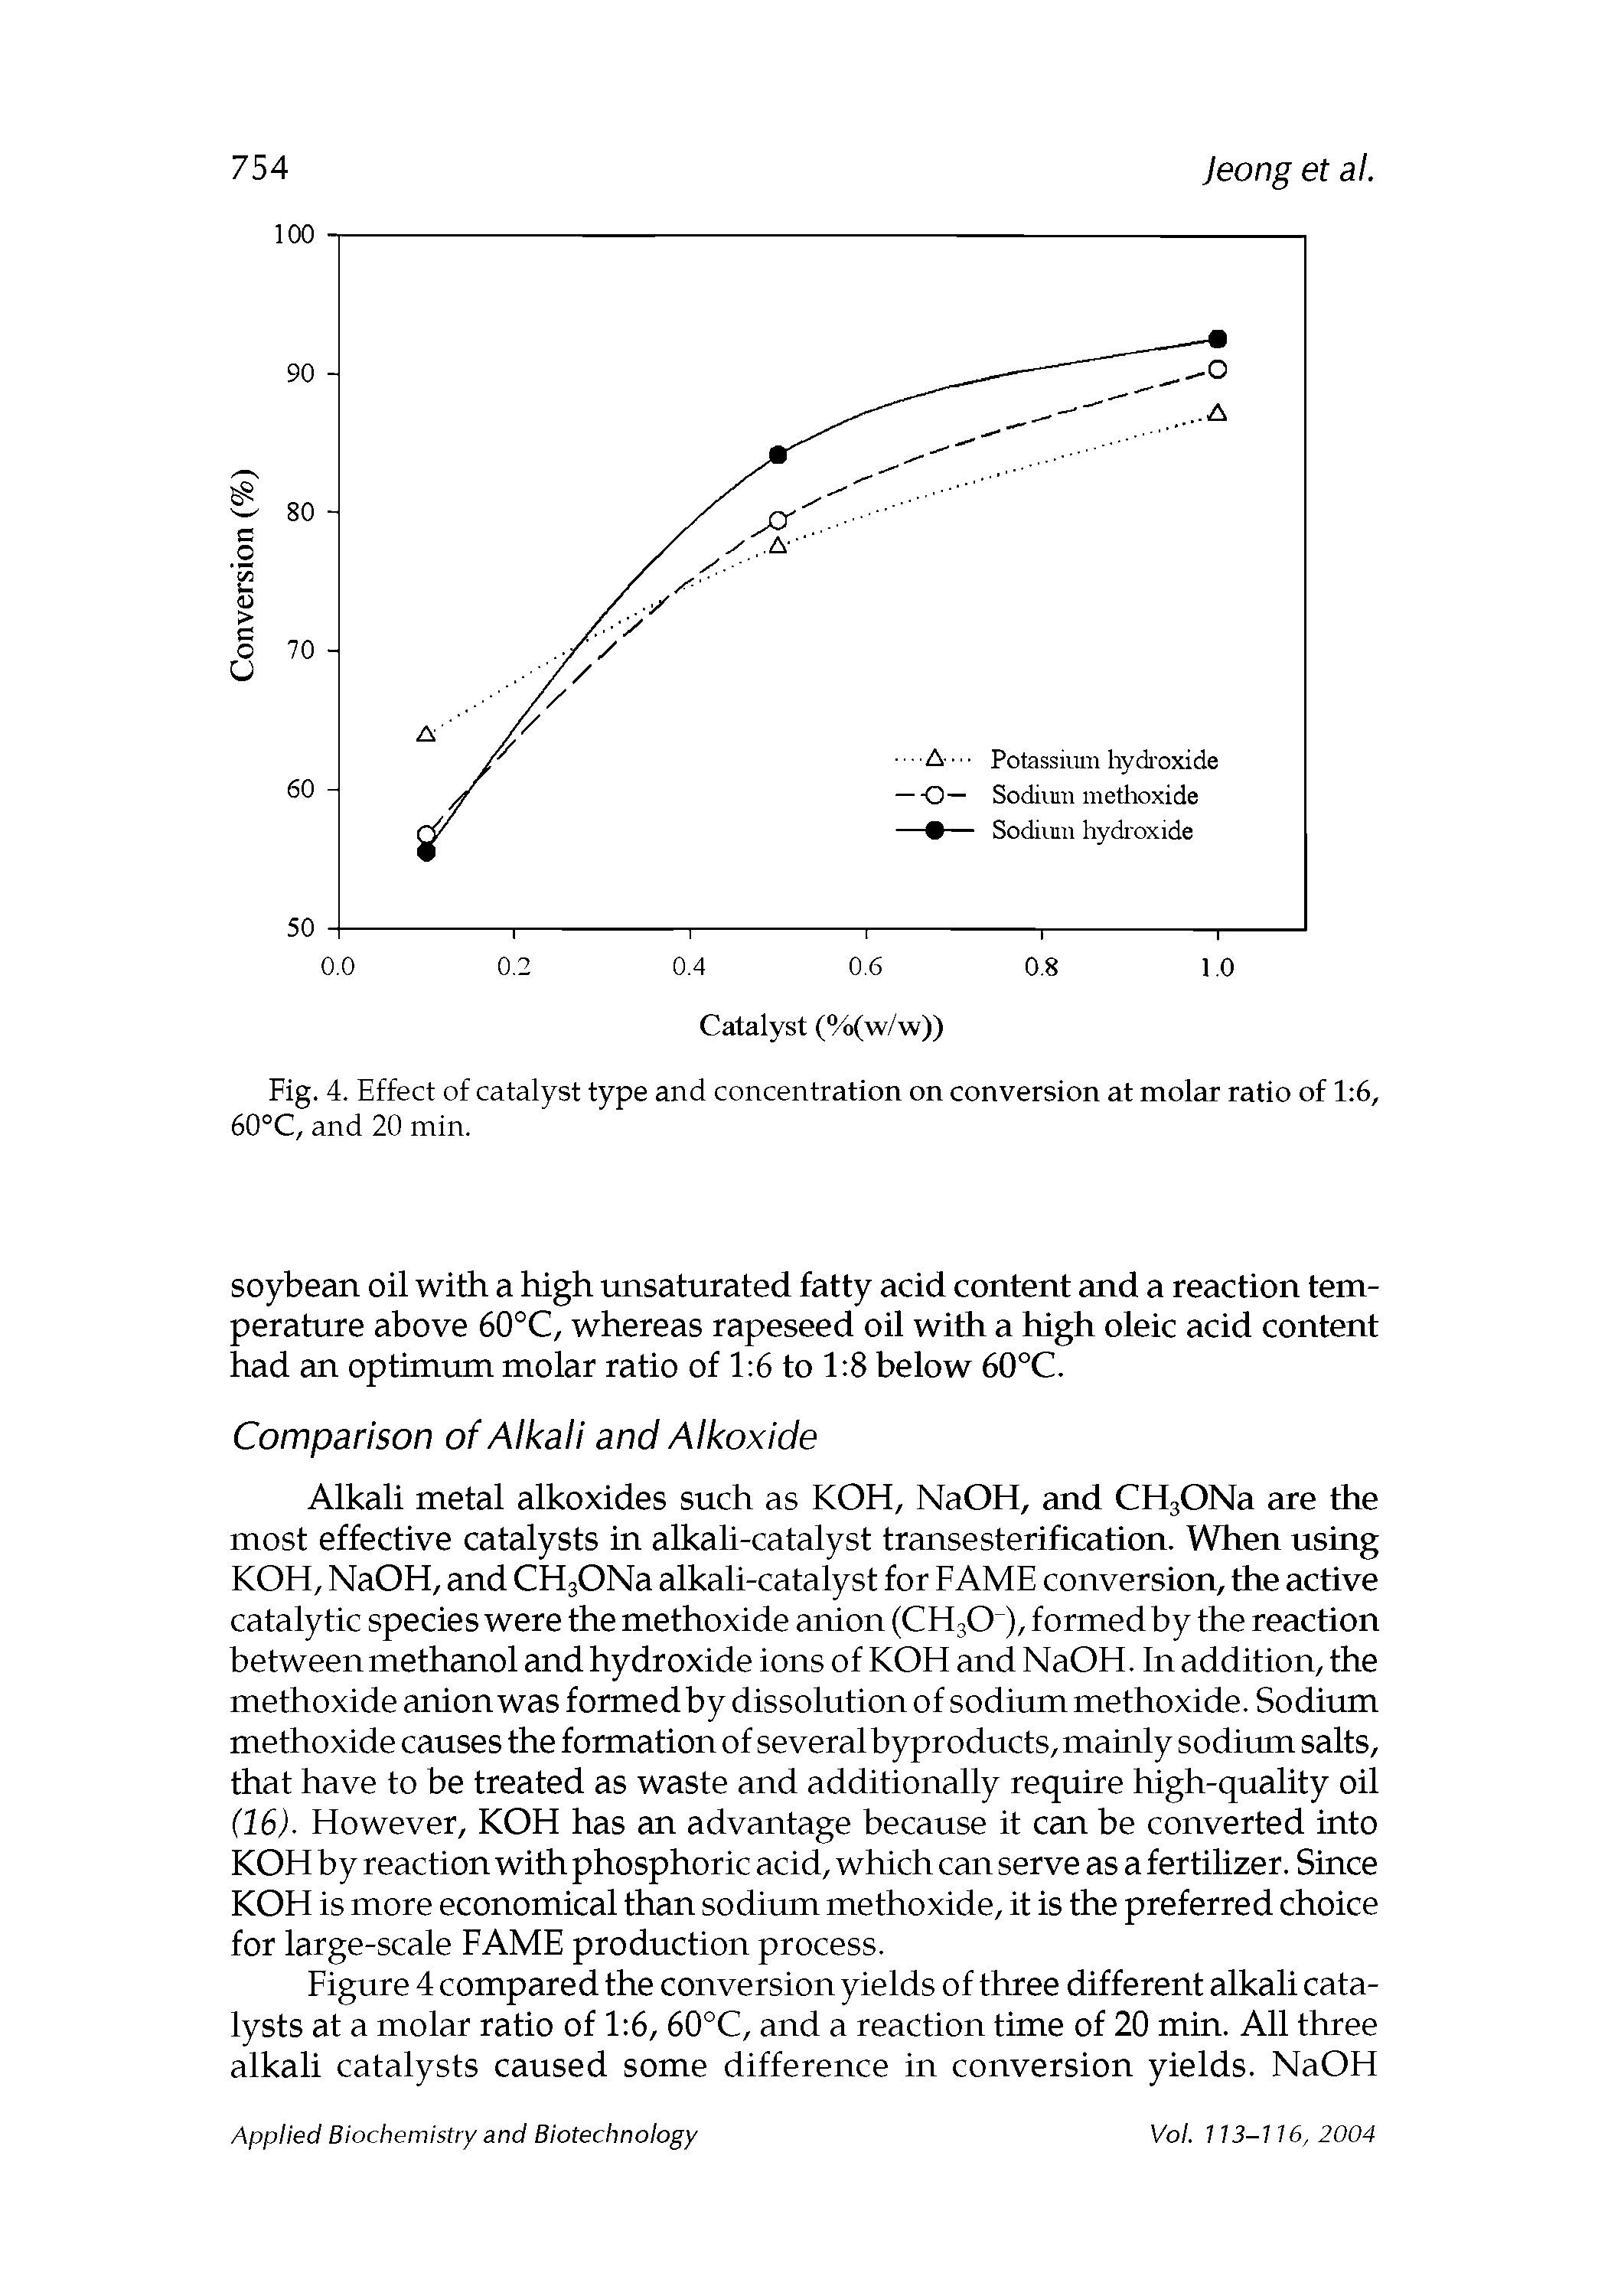 Fig. 4. Effect of catalyst type and concentration on conversion at molar ratio of 1 6, 60°C, and 20 min.